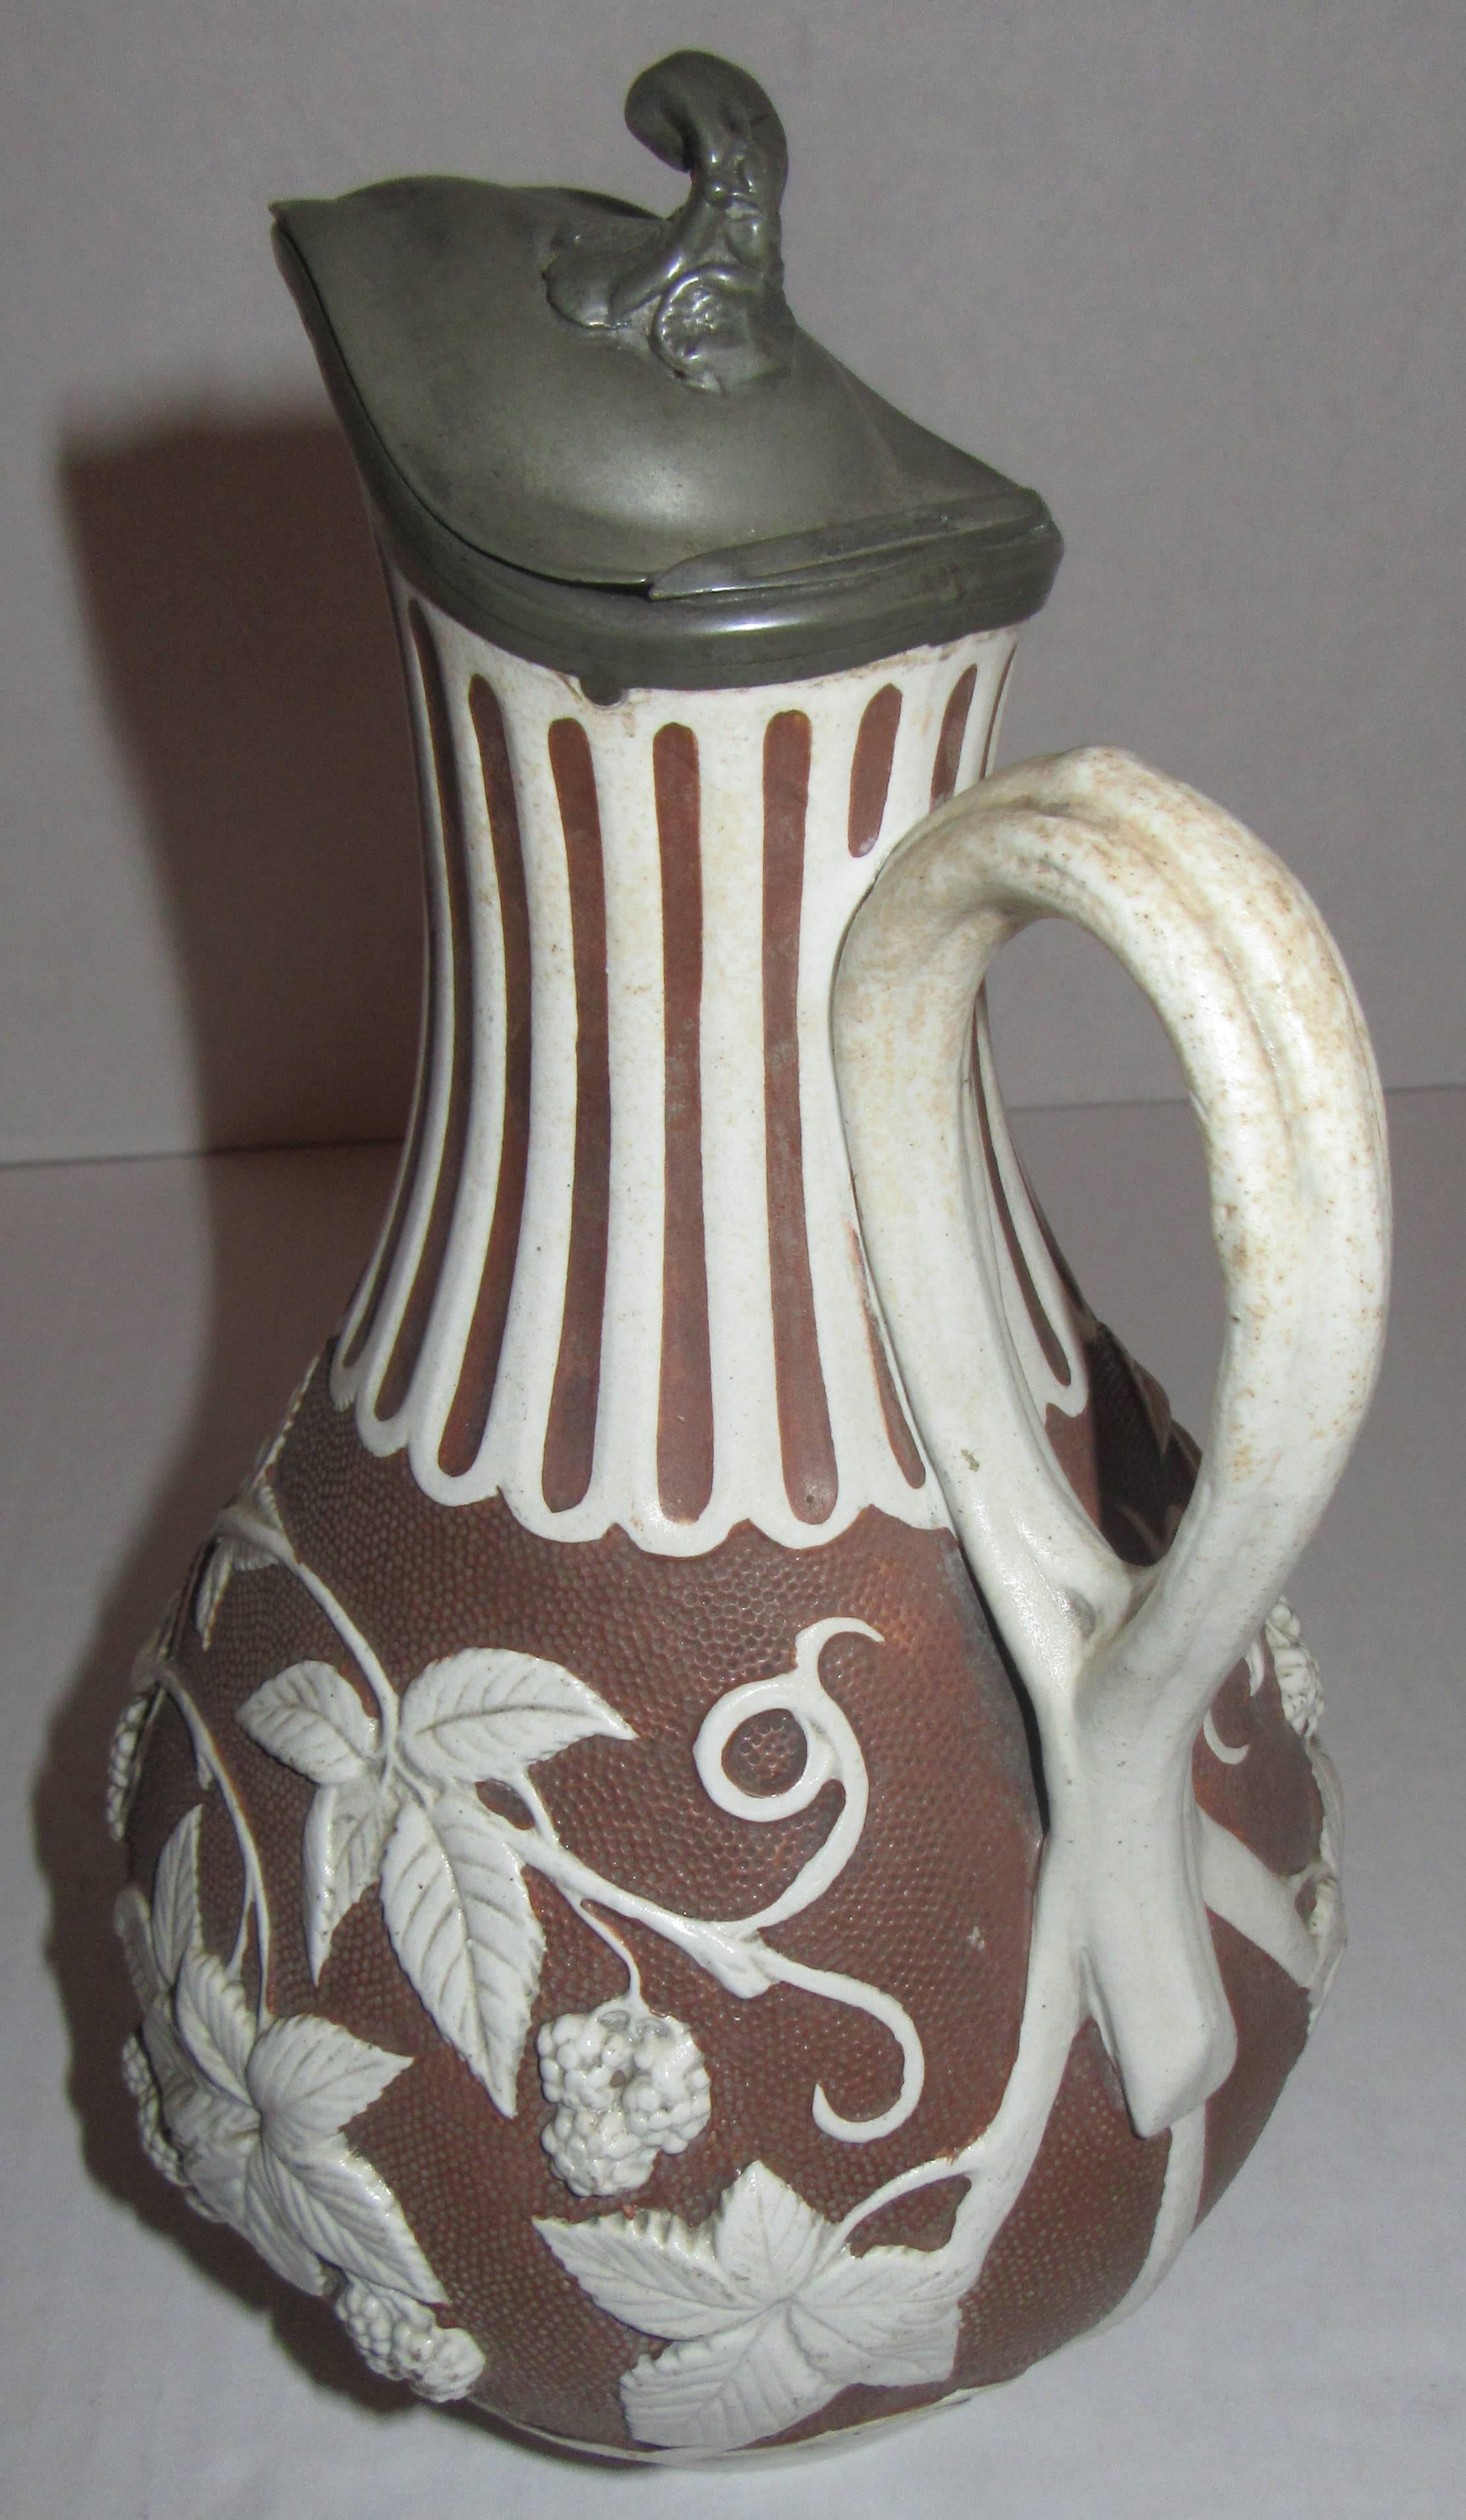 Blackberry on the vine, brown and white Parian ware pitcher with the original pewter lid. The marking dates it to being produced in England on January 18th, 1863.